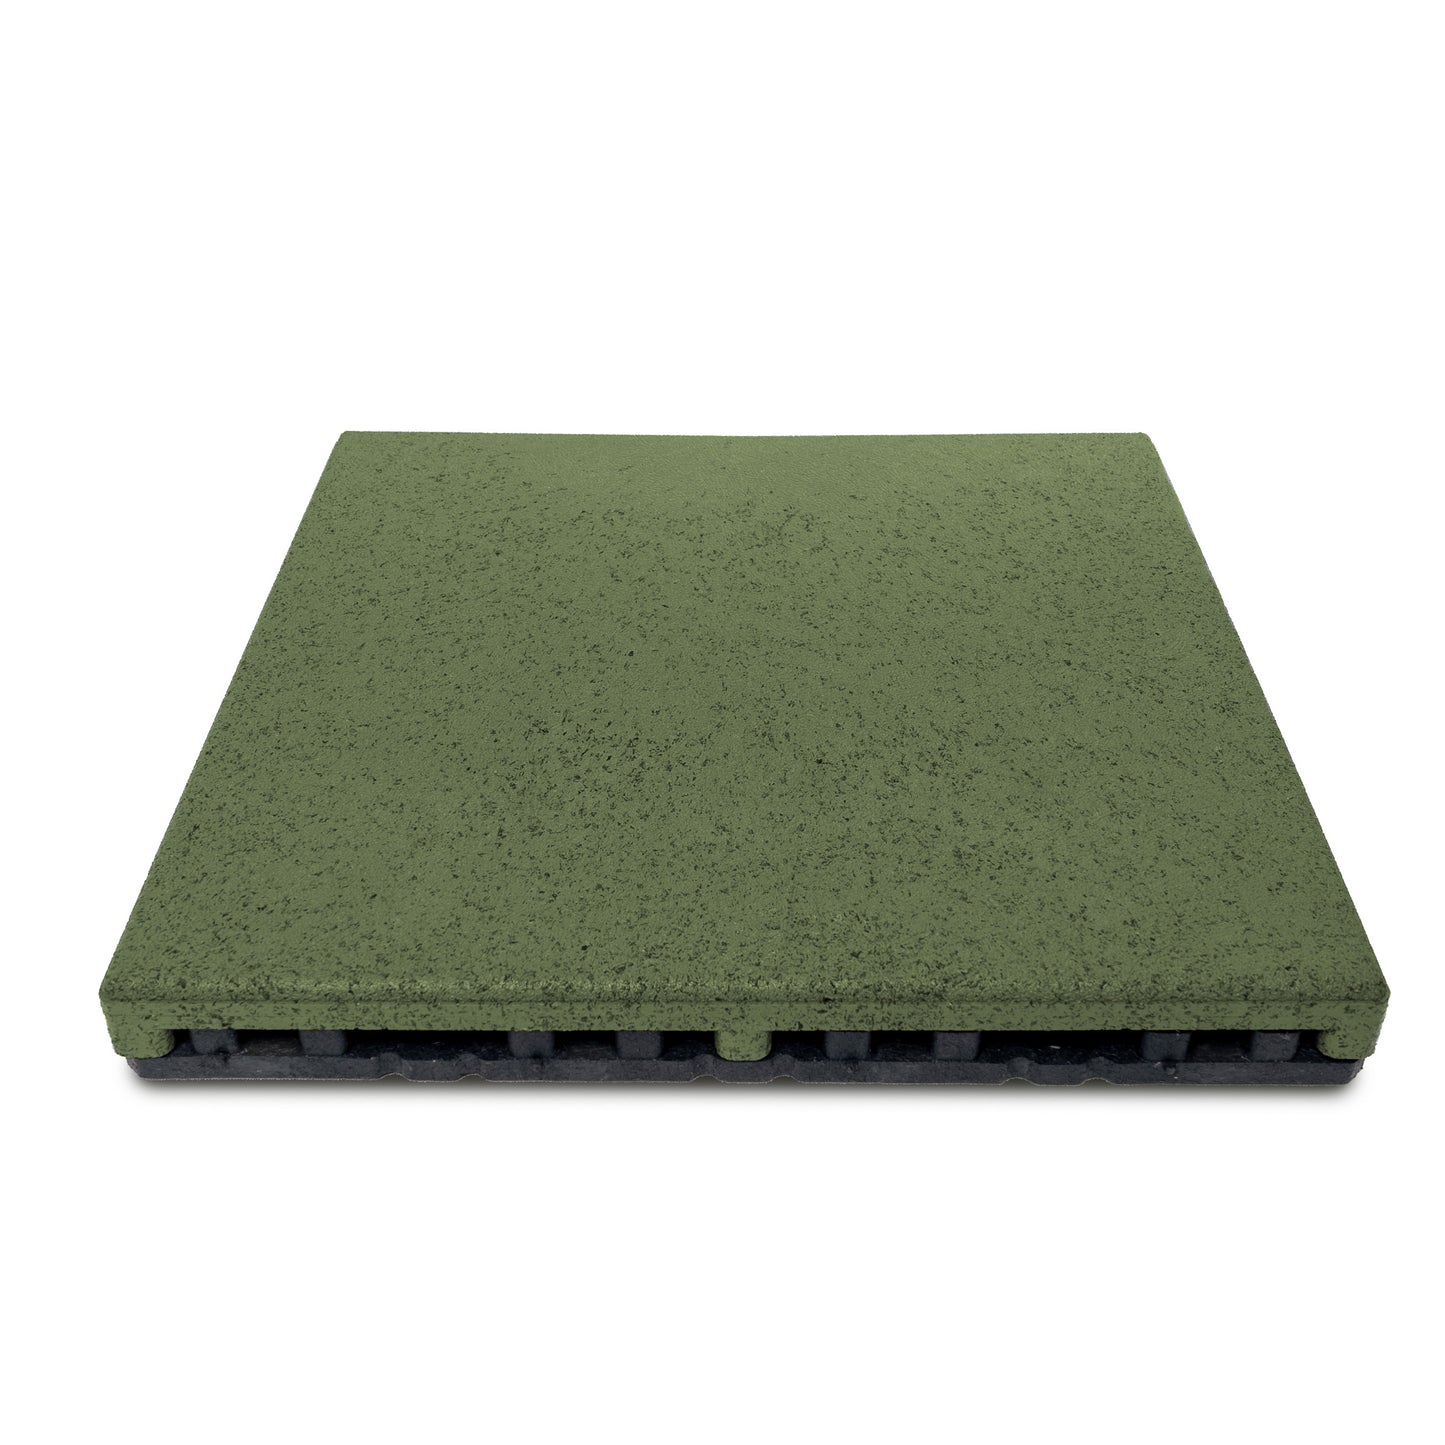 Aspire Paver with Grid (1 - 16" x 16" Paver on 16" x 16" Grid)